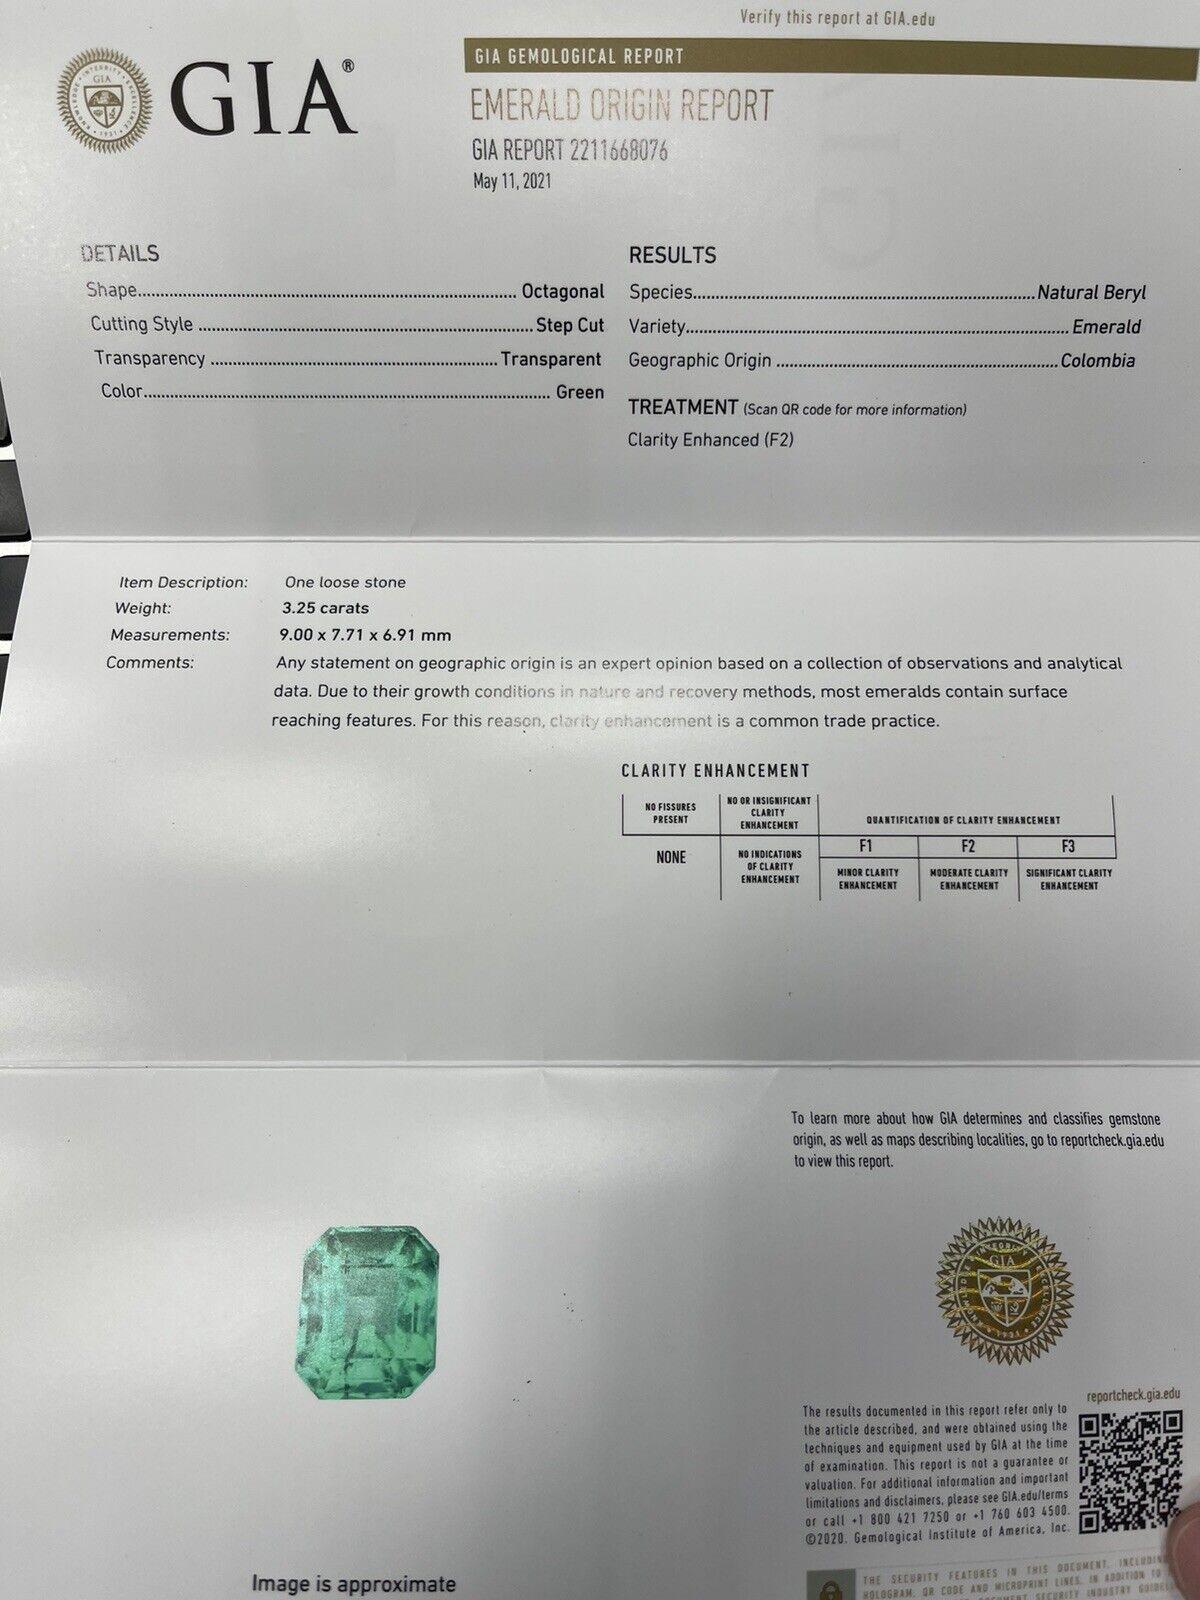 Platinum Asscher Cut Diamond With A GIA Certified Emerald Center Ring
Size 6
7.7 Grams
10 Asscher Cut Diamonds 0.5 Carats Total Weight
Color: F-G Clarity: VS1-Si1
1 Emerald Cut Colombian Emerald  
this is a beautiful ring that shows off this bright